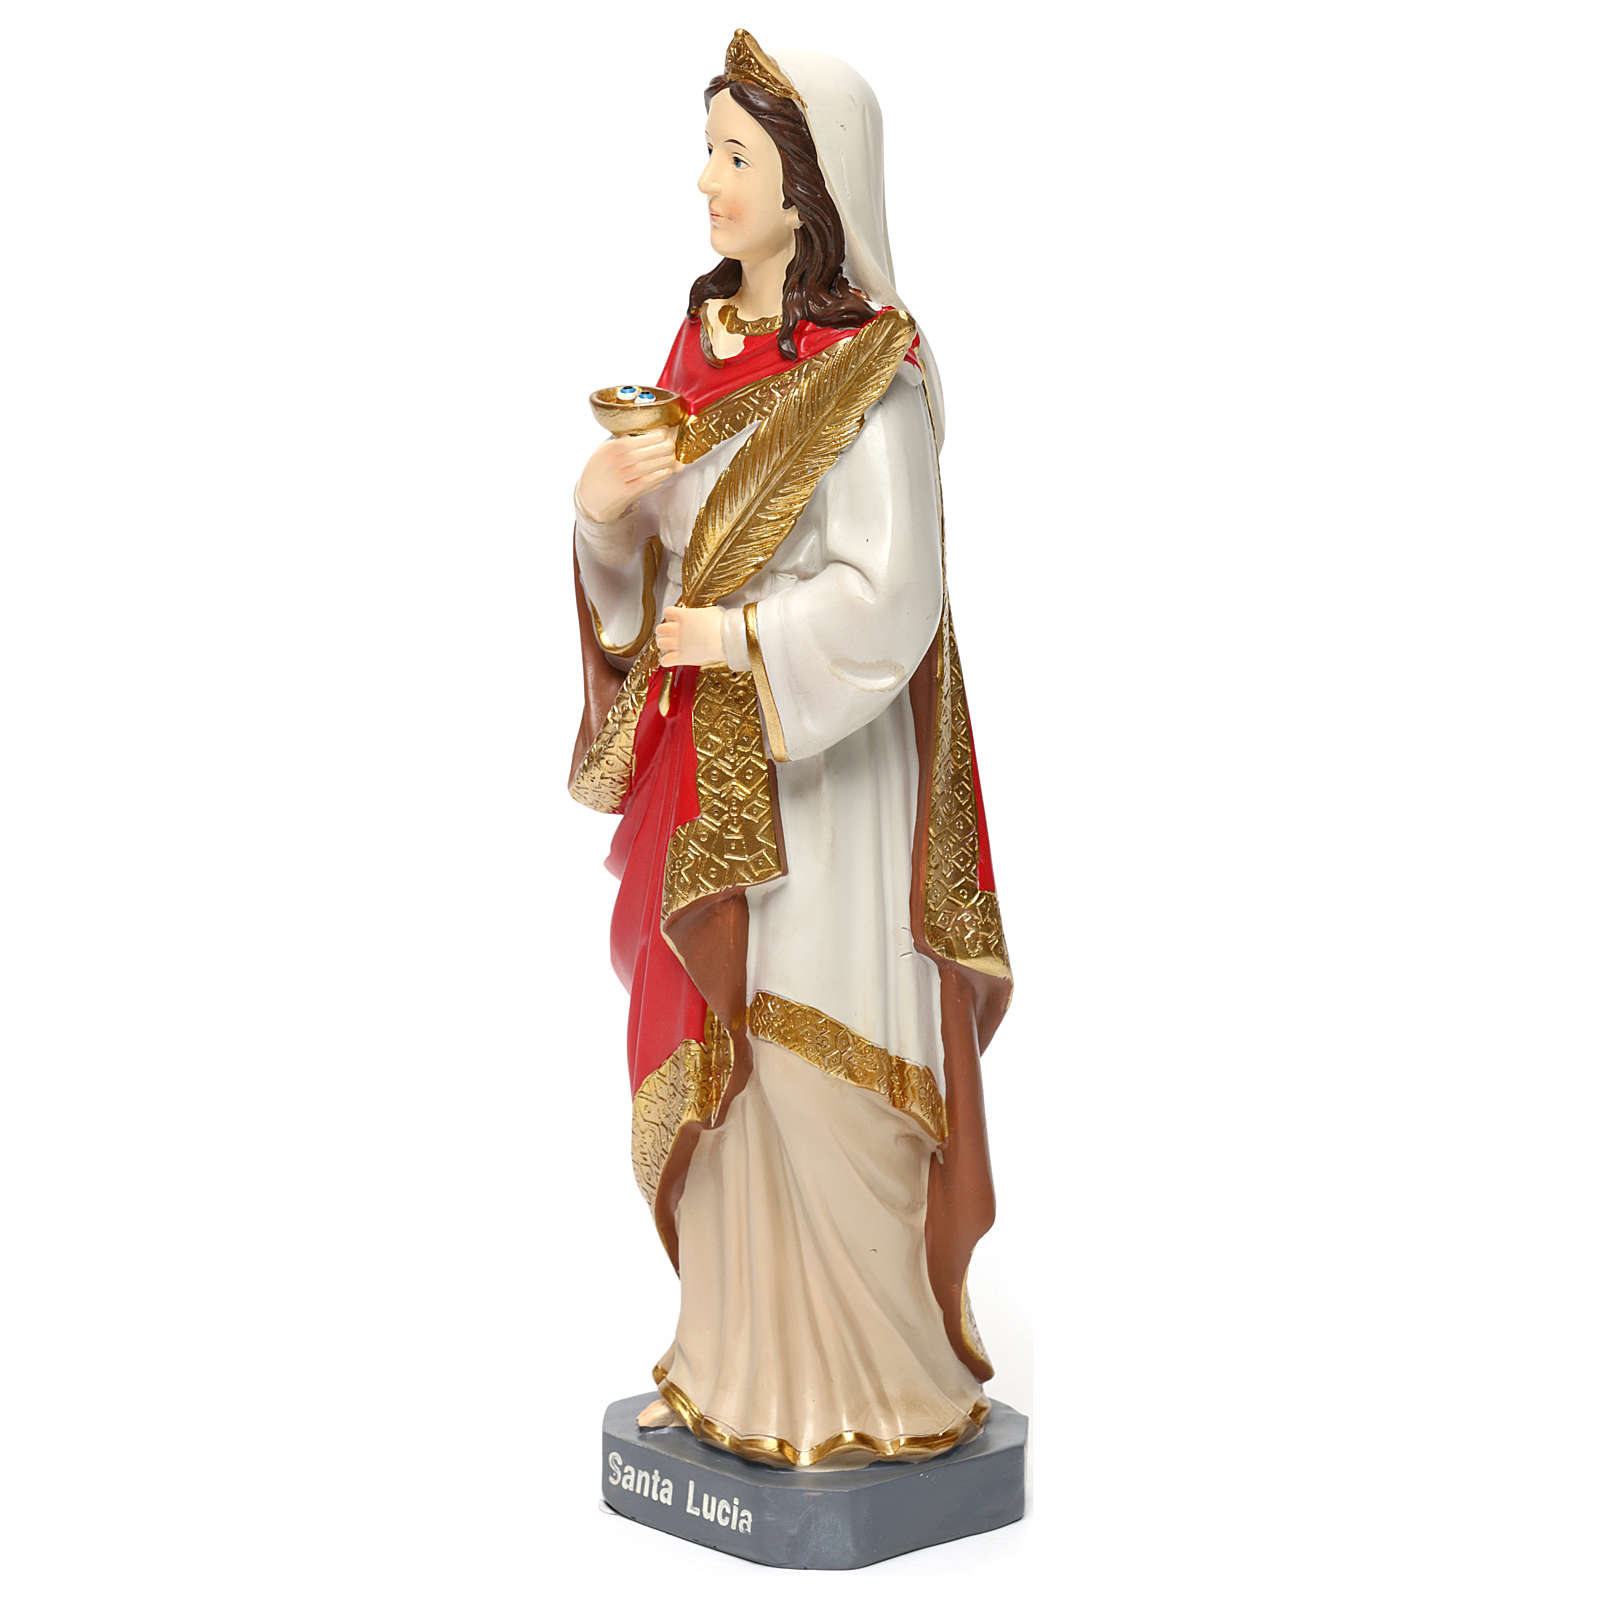 Saint Lucy 30 cm Statue, in colored resin | online sales on HOLYART.com